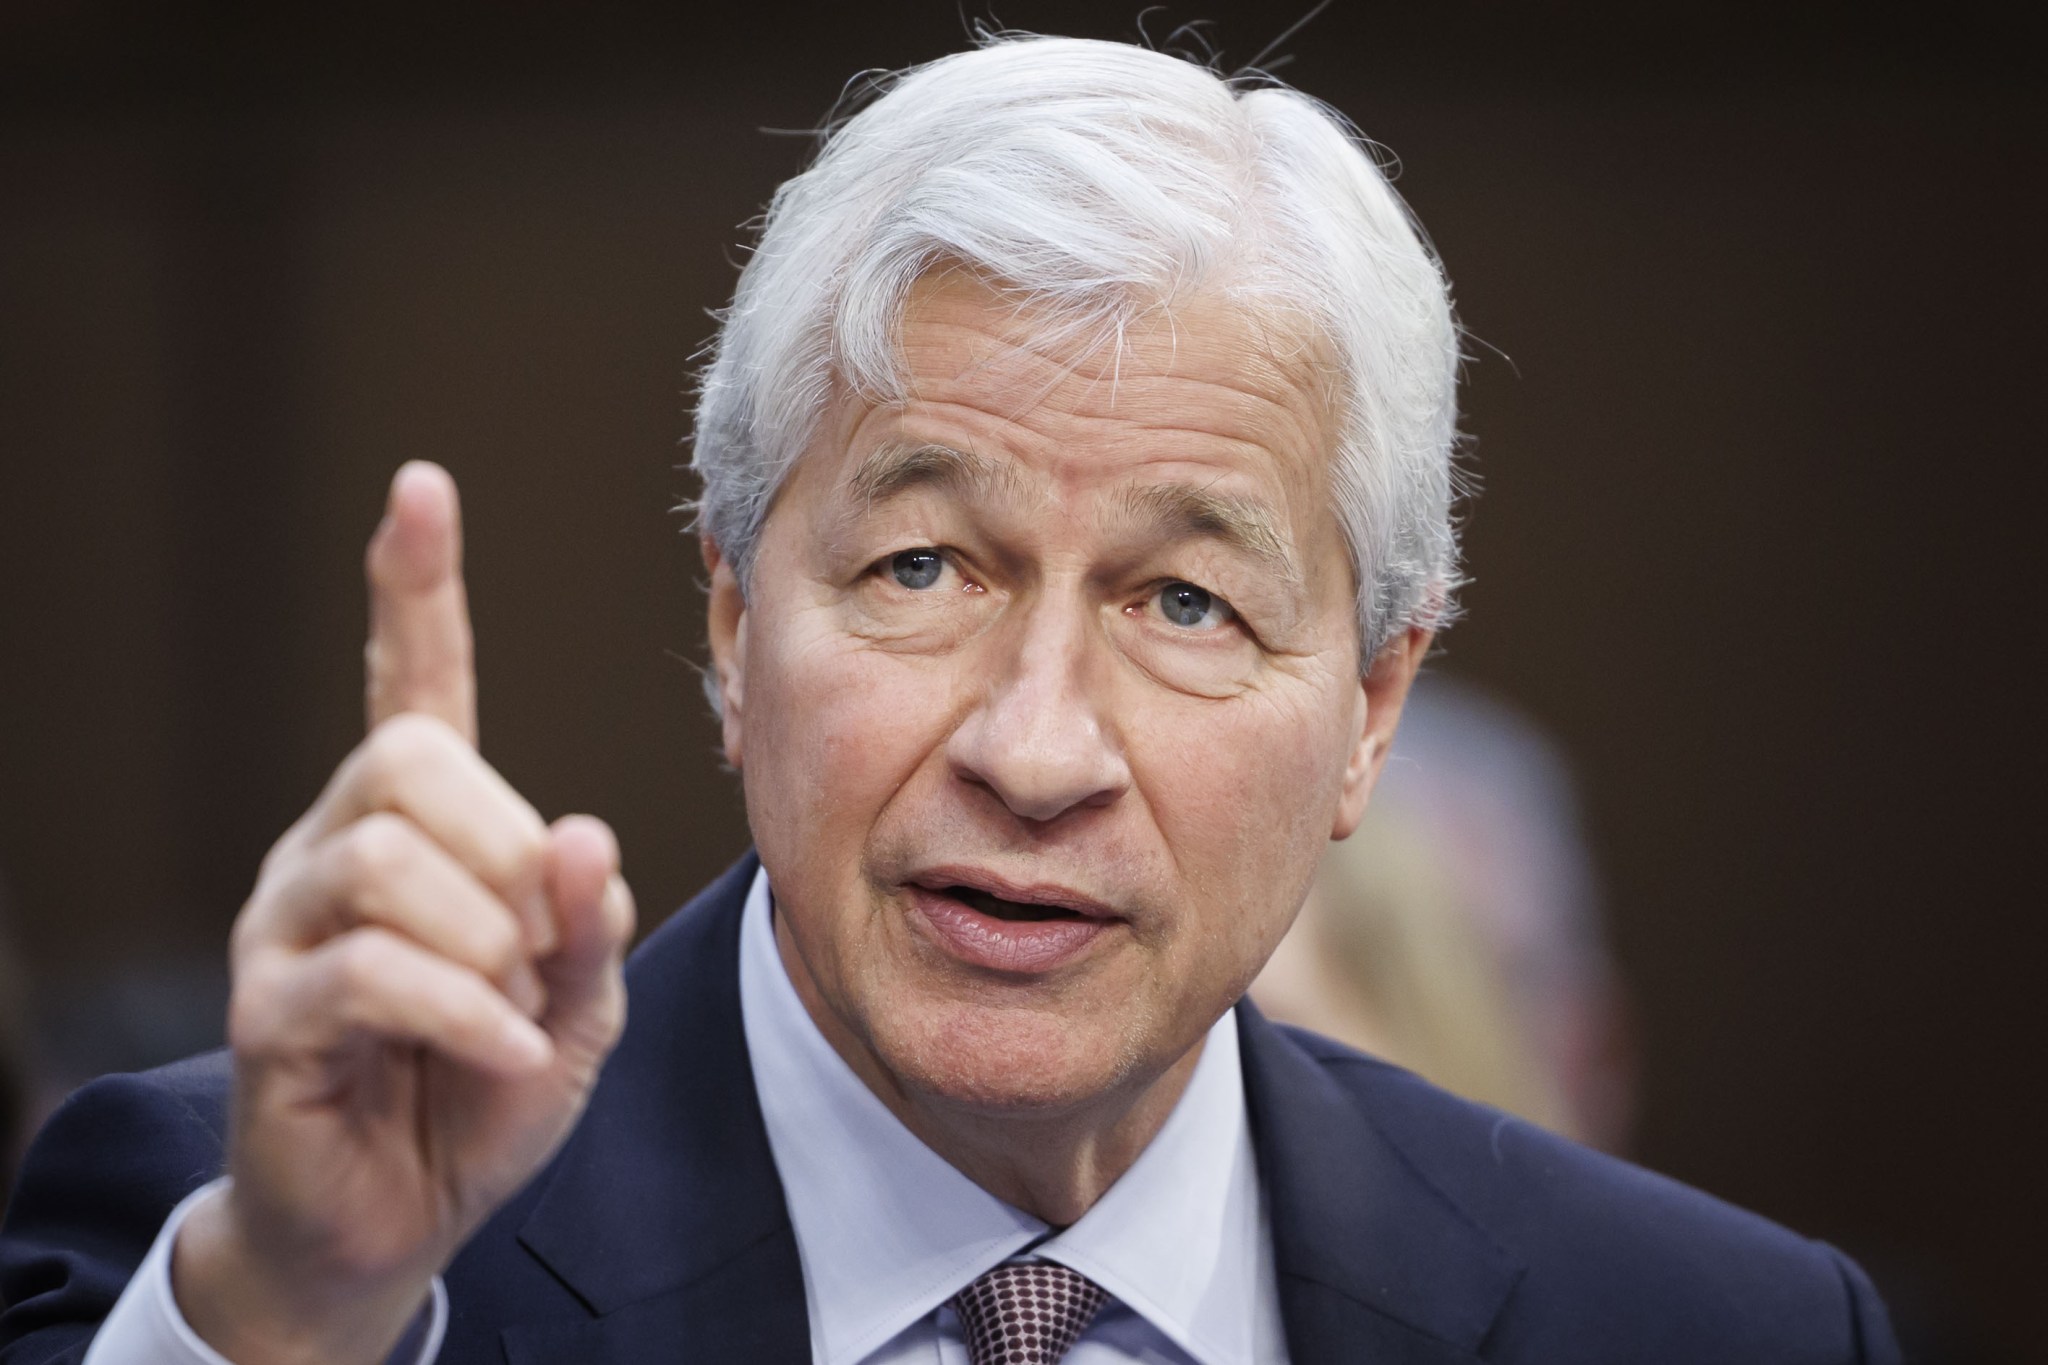 jpmorgan’s executive reshuffle drops some hints about who will replace jamie dimon as ceo